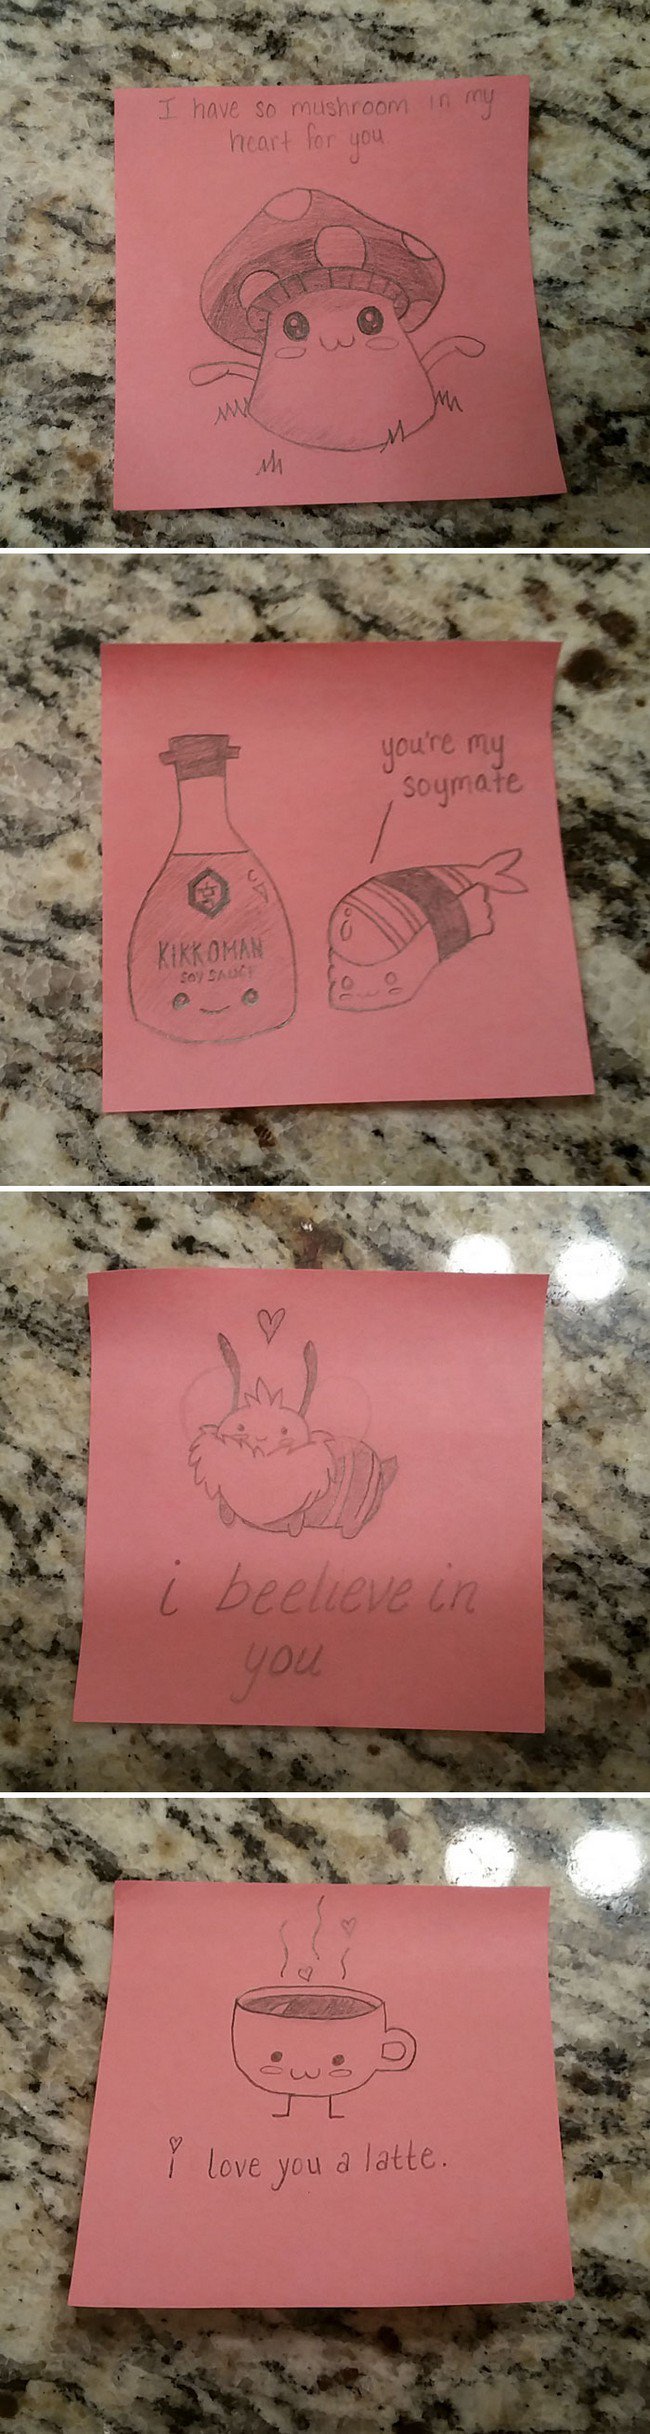 funny love notes pun drawings